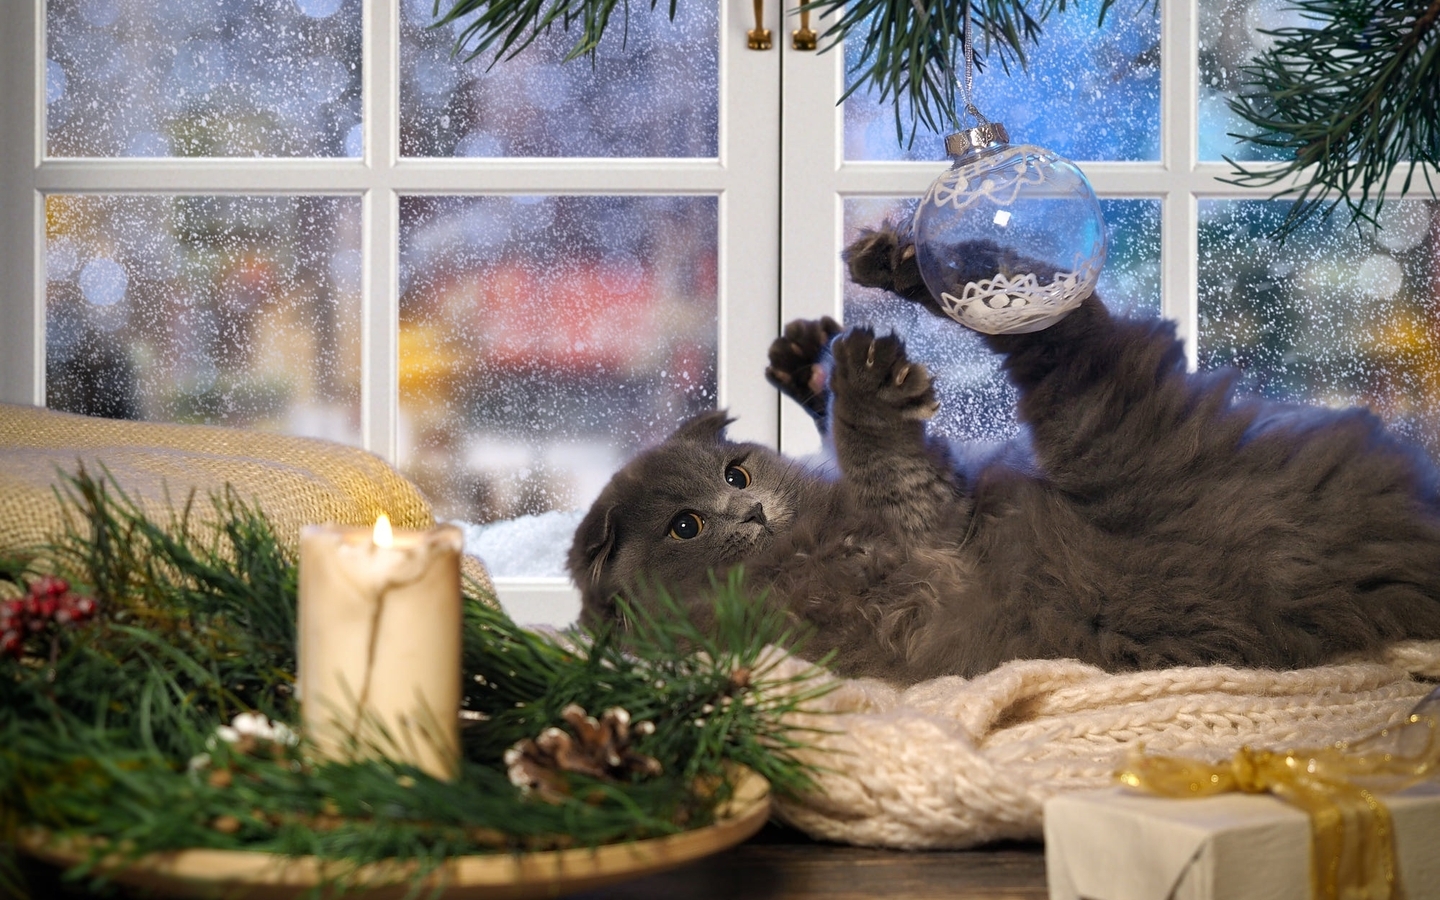 Image: Cat, toy, decoration, game, tree, window, gift